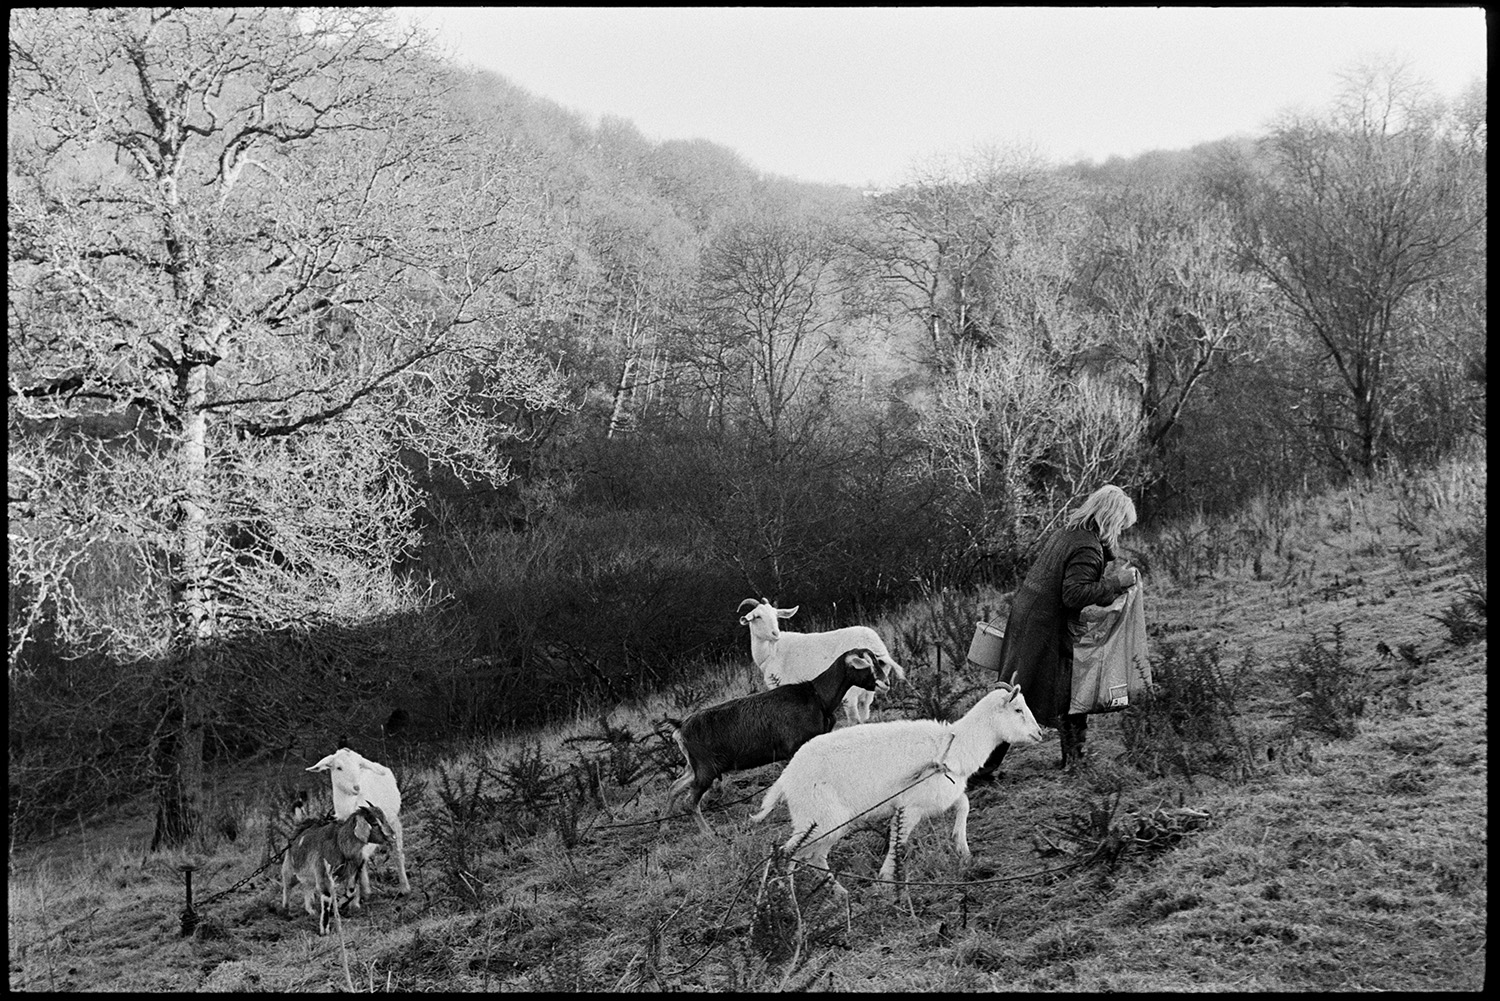 Woman milking goats, early morning frost on trees. 
[Jo Curzon going to milk goats in a field surrounded by trees at Millhams, Dolton on a frosty morning. The goats are tethered to posts. Jo Curzon is carrying a bucket and sacks.]